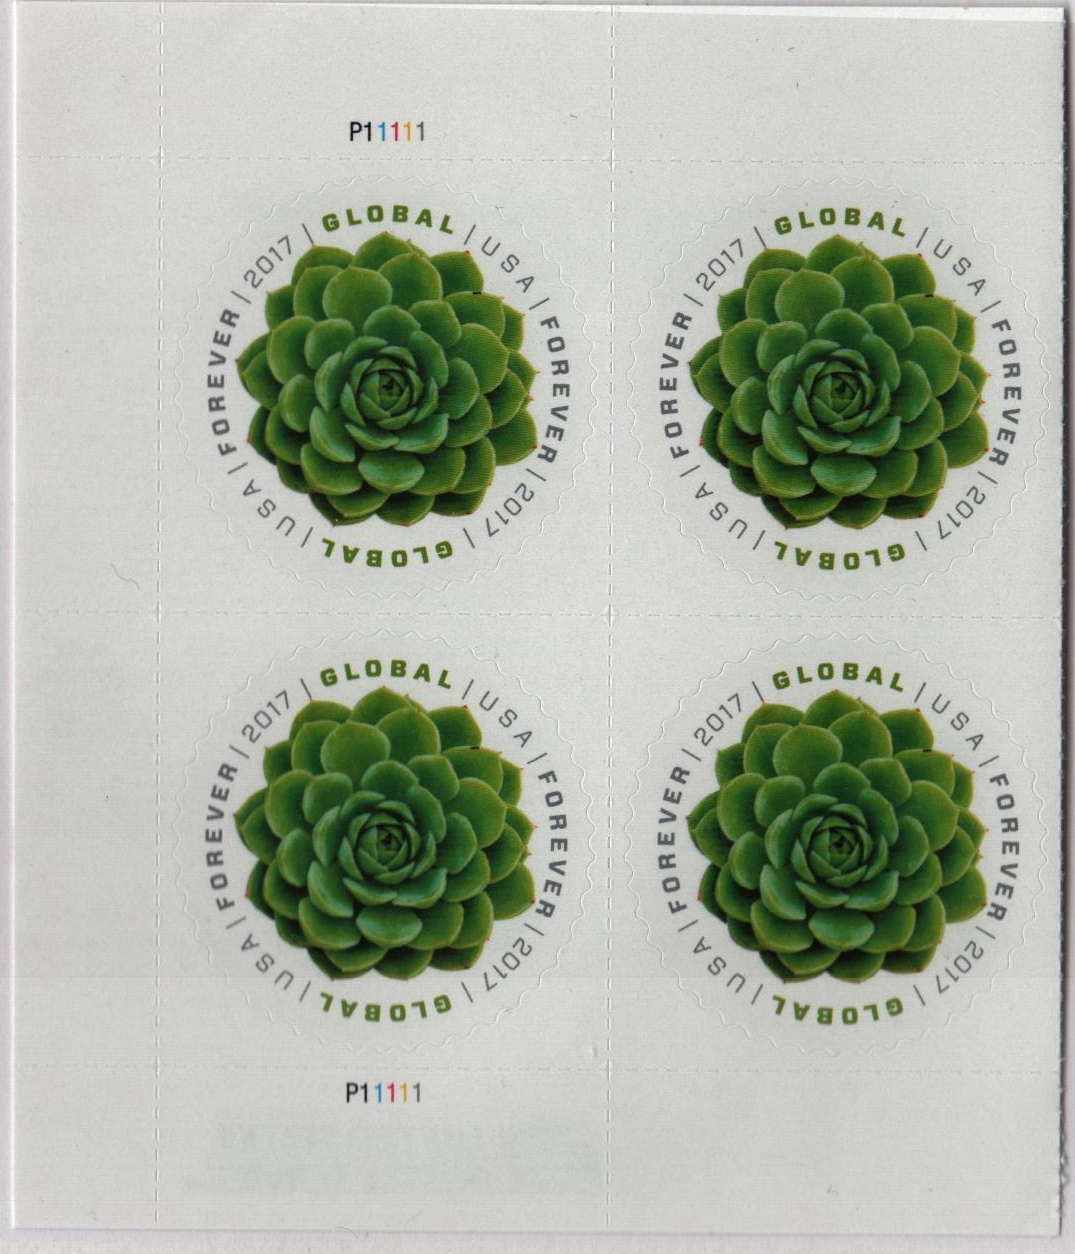 5198 - 2017 Global Forever Stamp - Green Succulent - Mystic Stamp Company